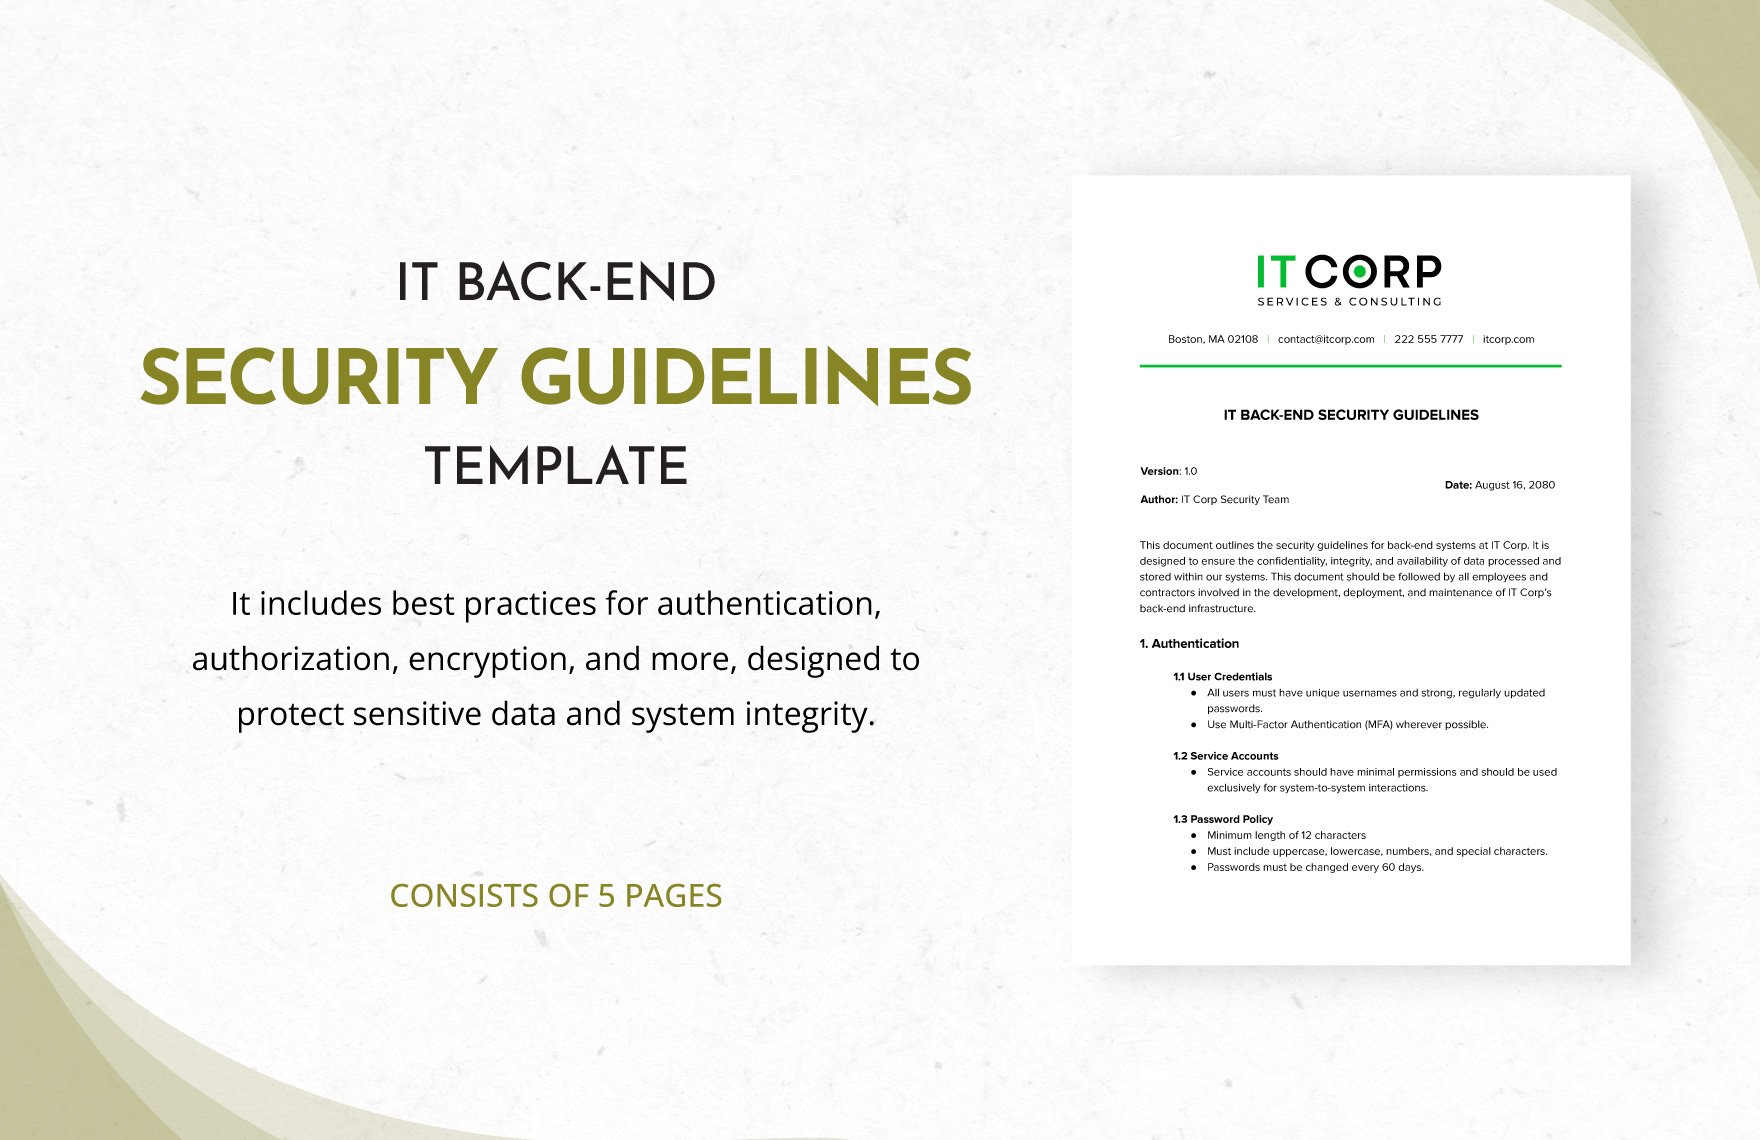 IT Back-End Security Guidelines Template